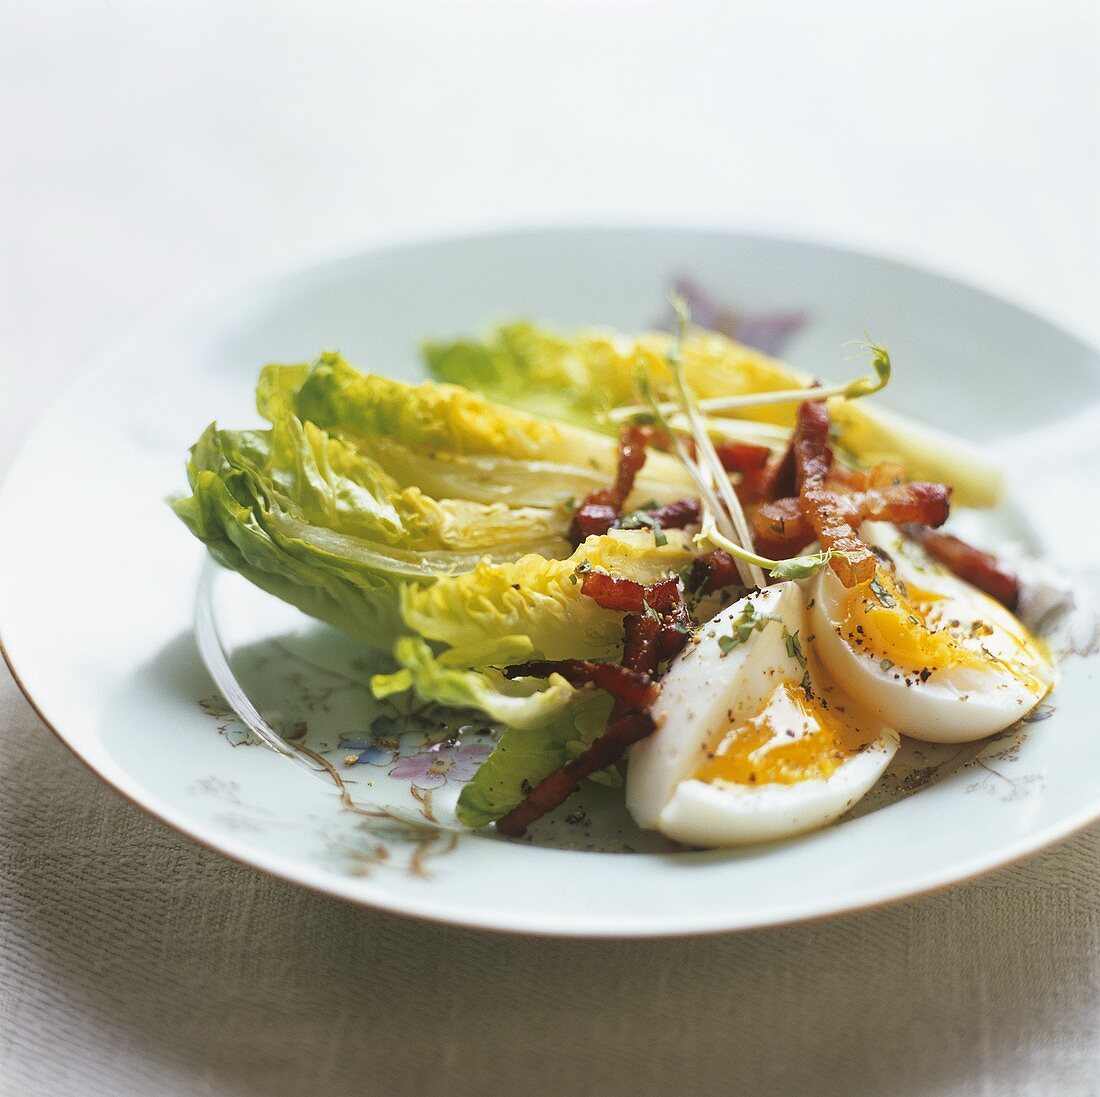 Romaine lettuce with boiled egg and fried bacon